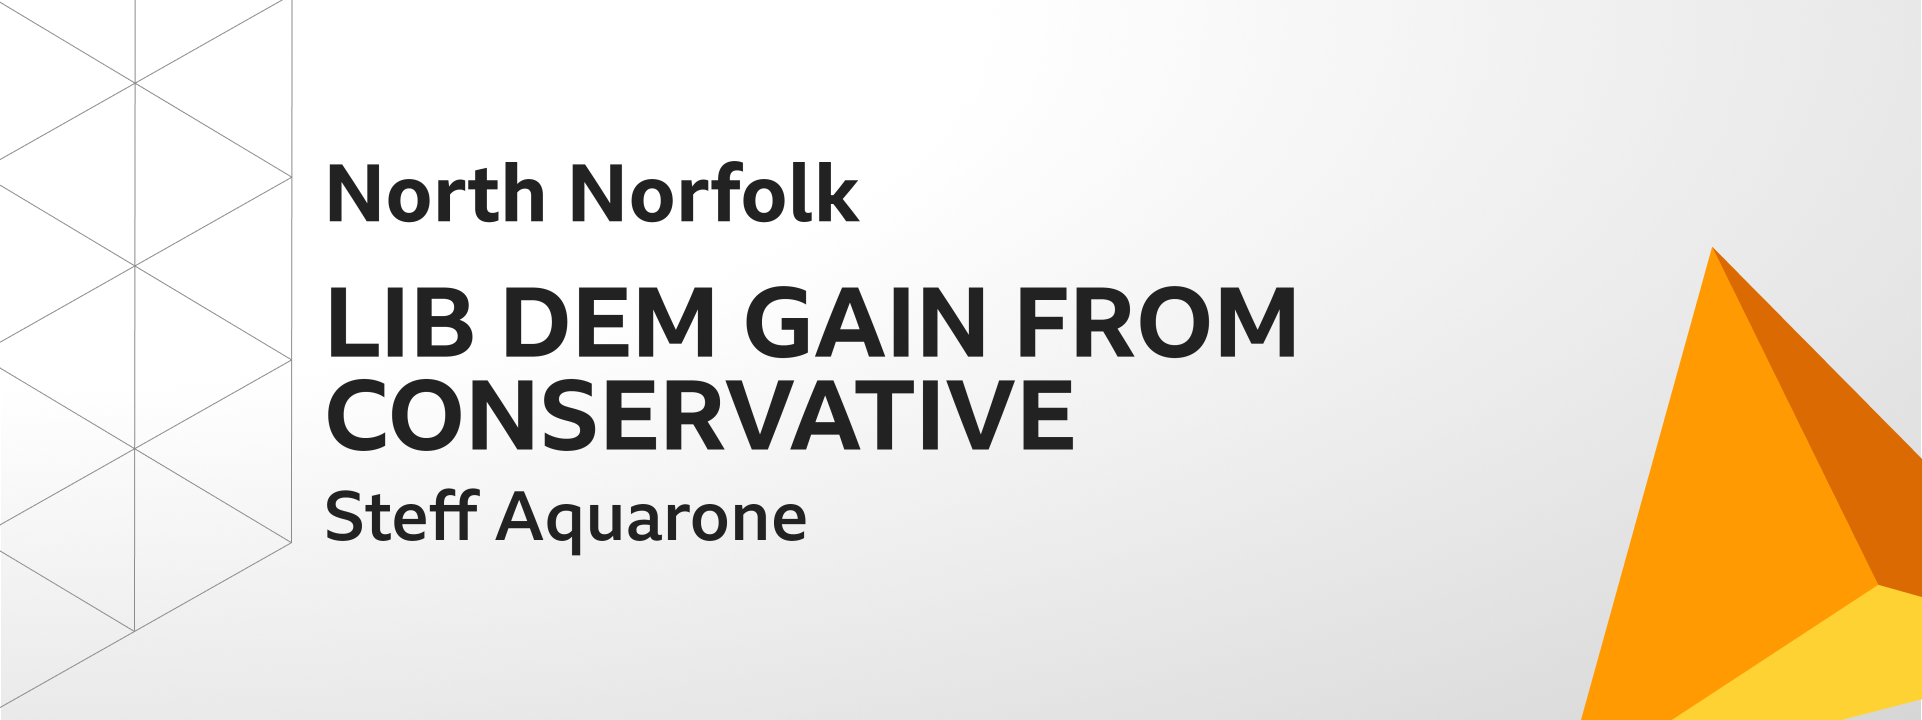 Graphic showing Liberal Democrats gain North Norfolk from the Conservatives. The winning candidate was Steff Aquarone.